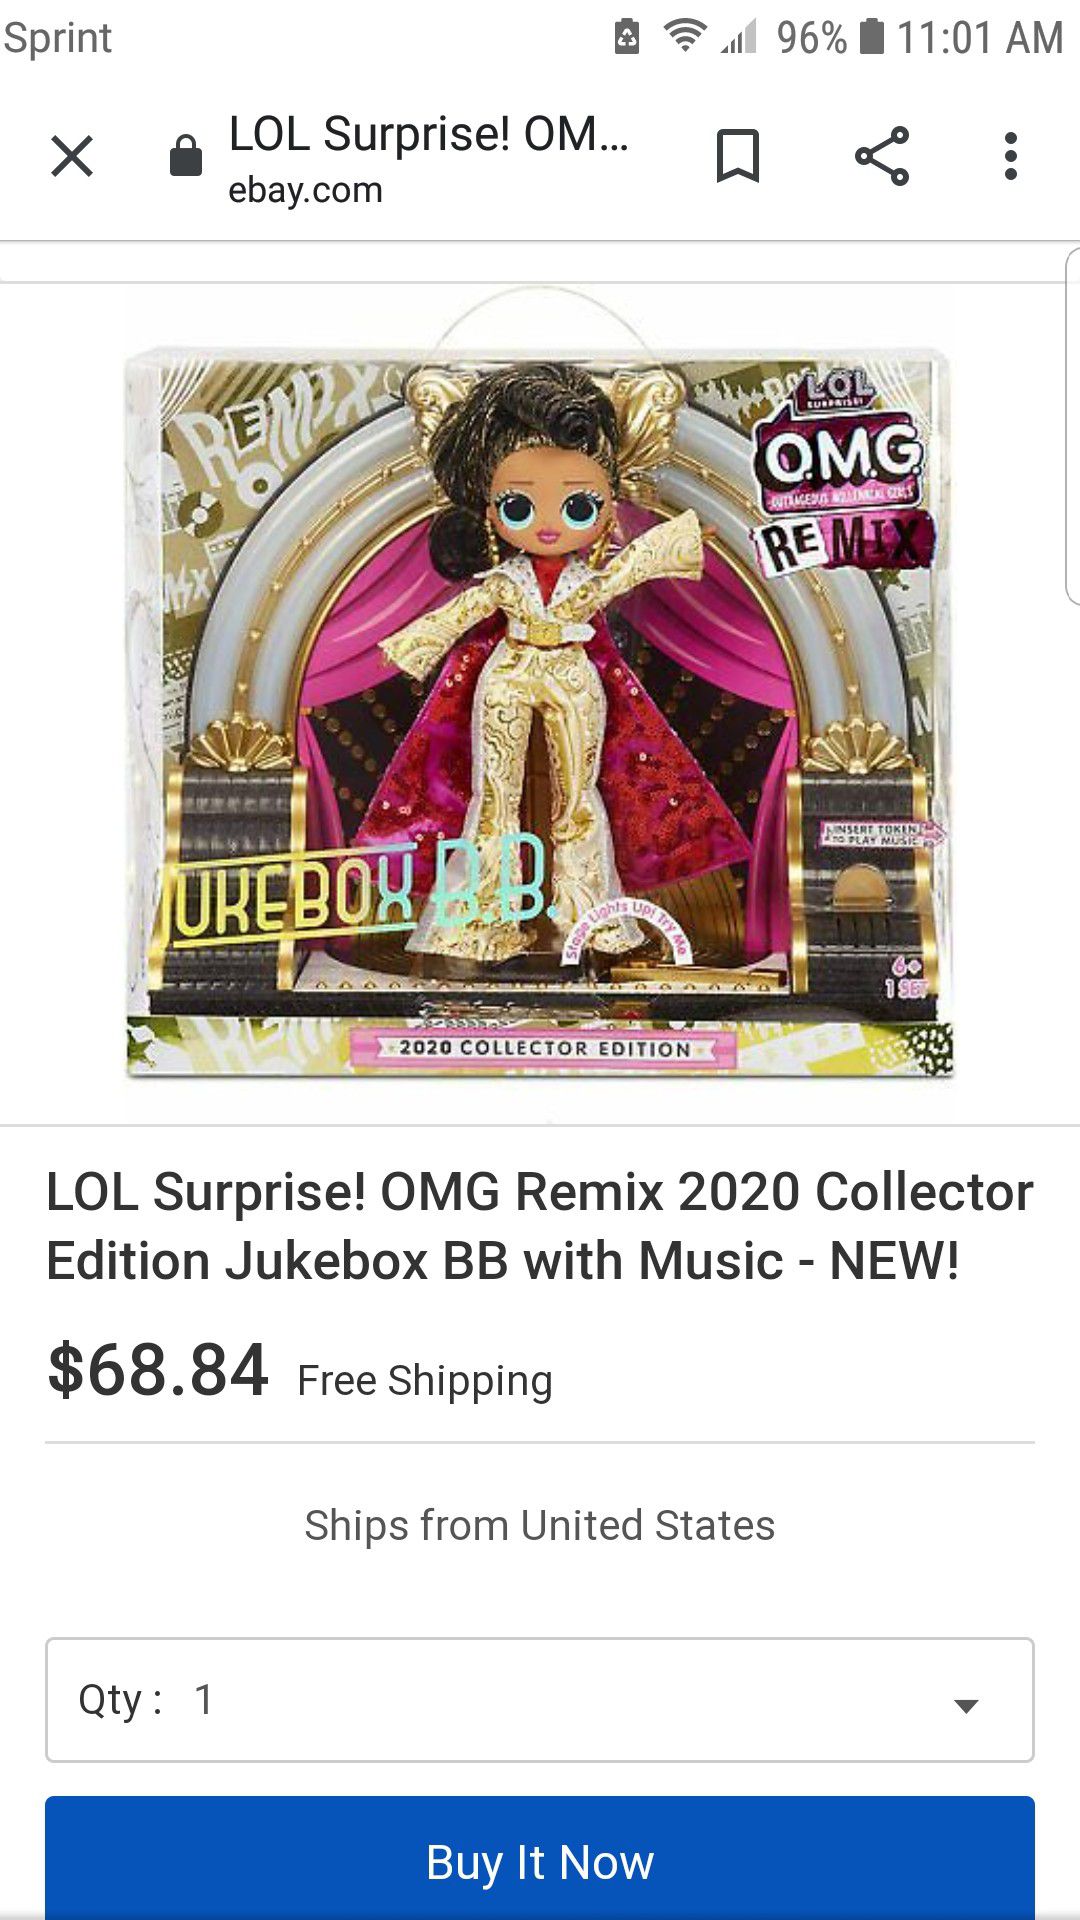 LOL Surprise OMG Remix 2020 Collector's Edition